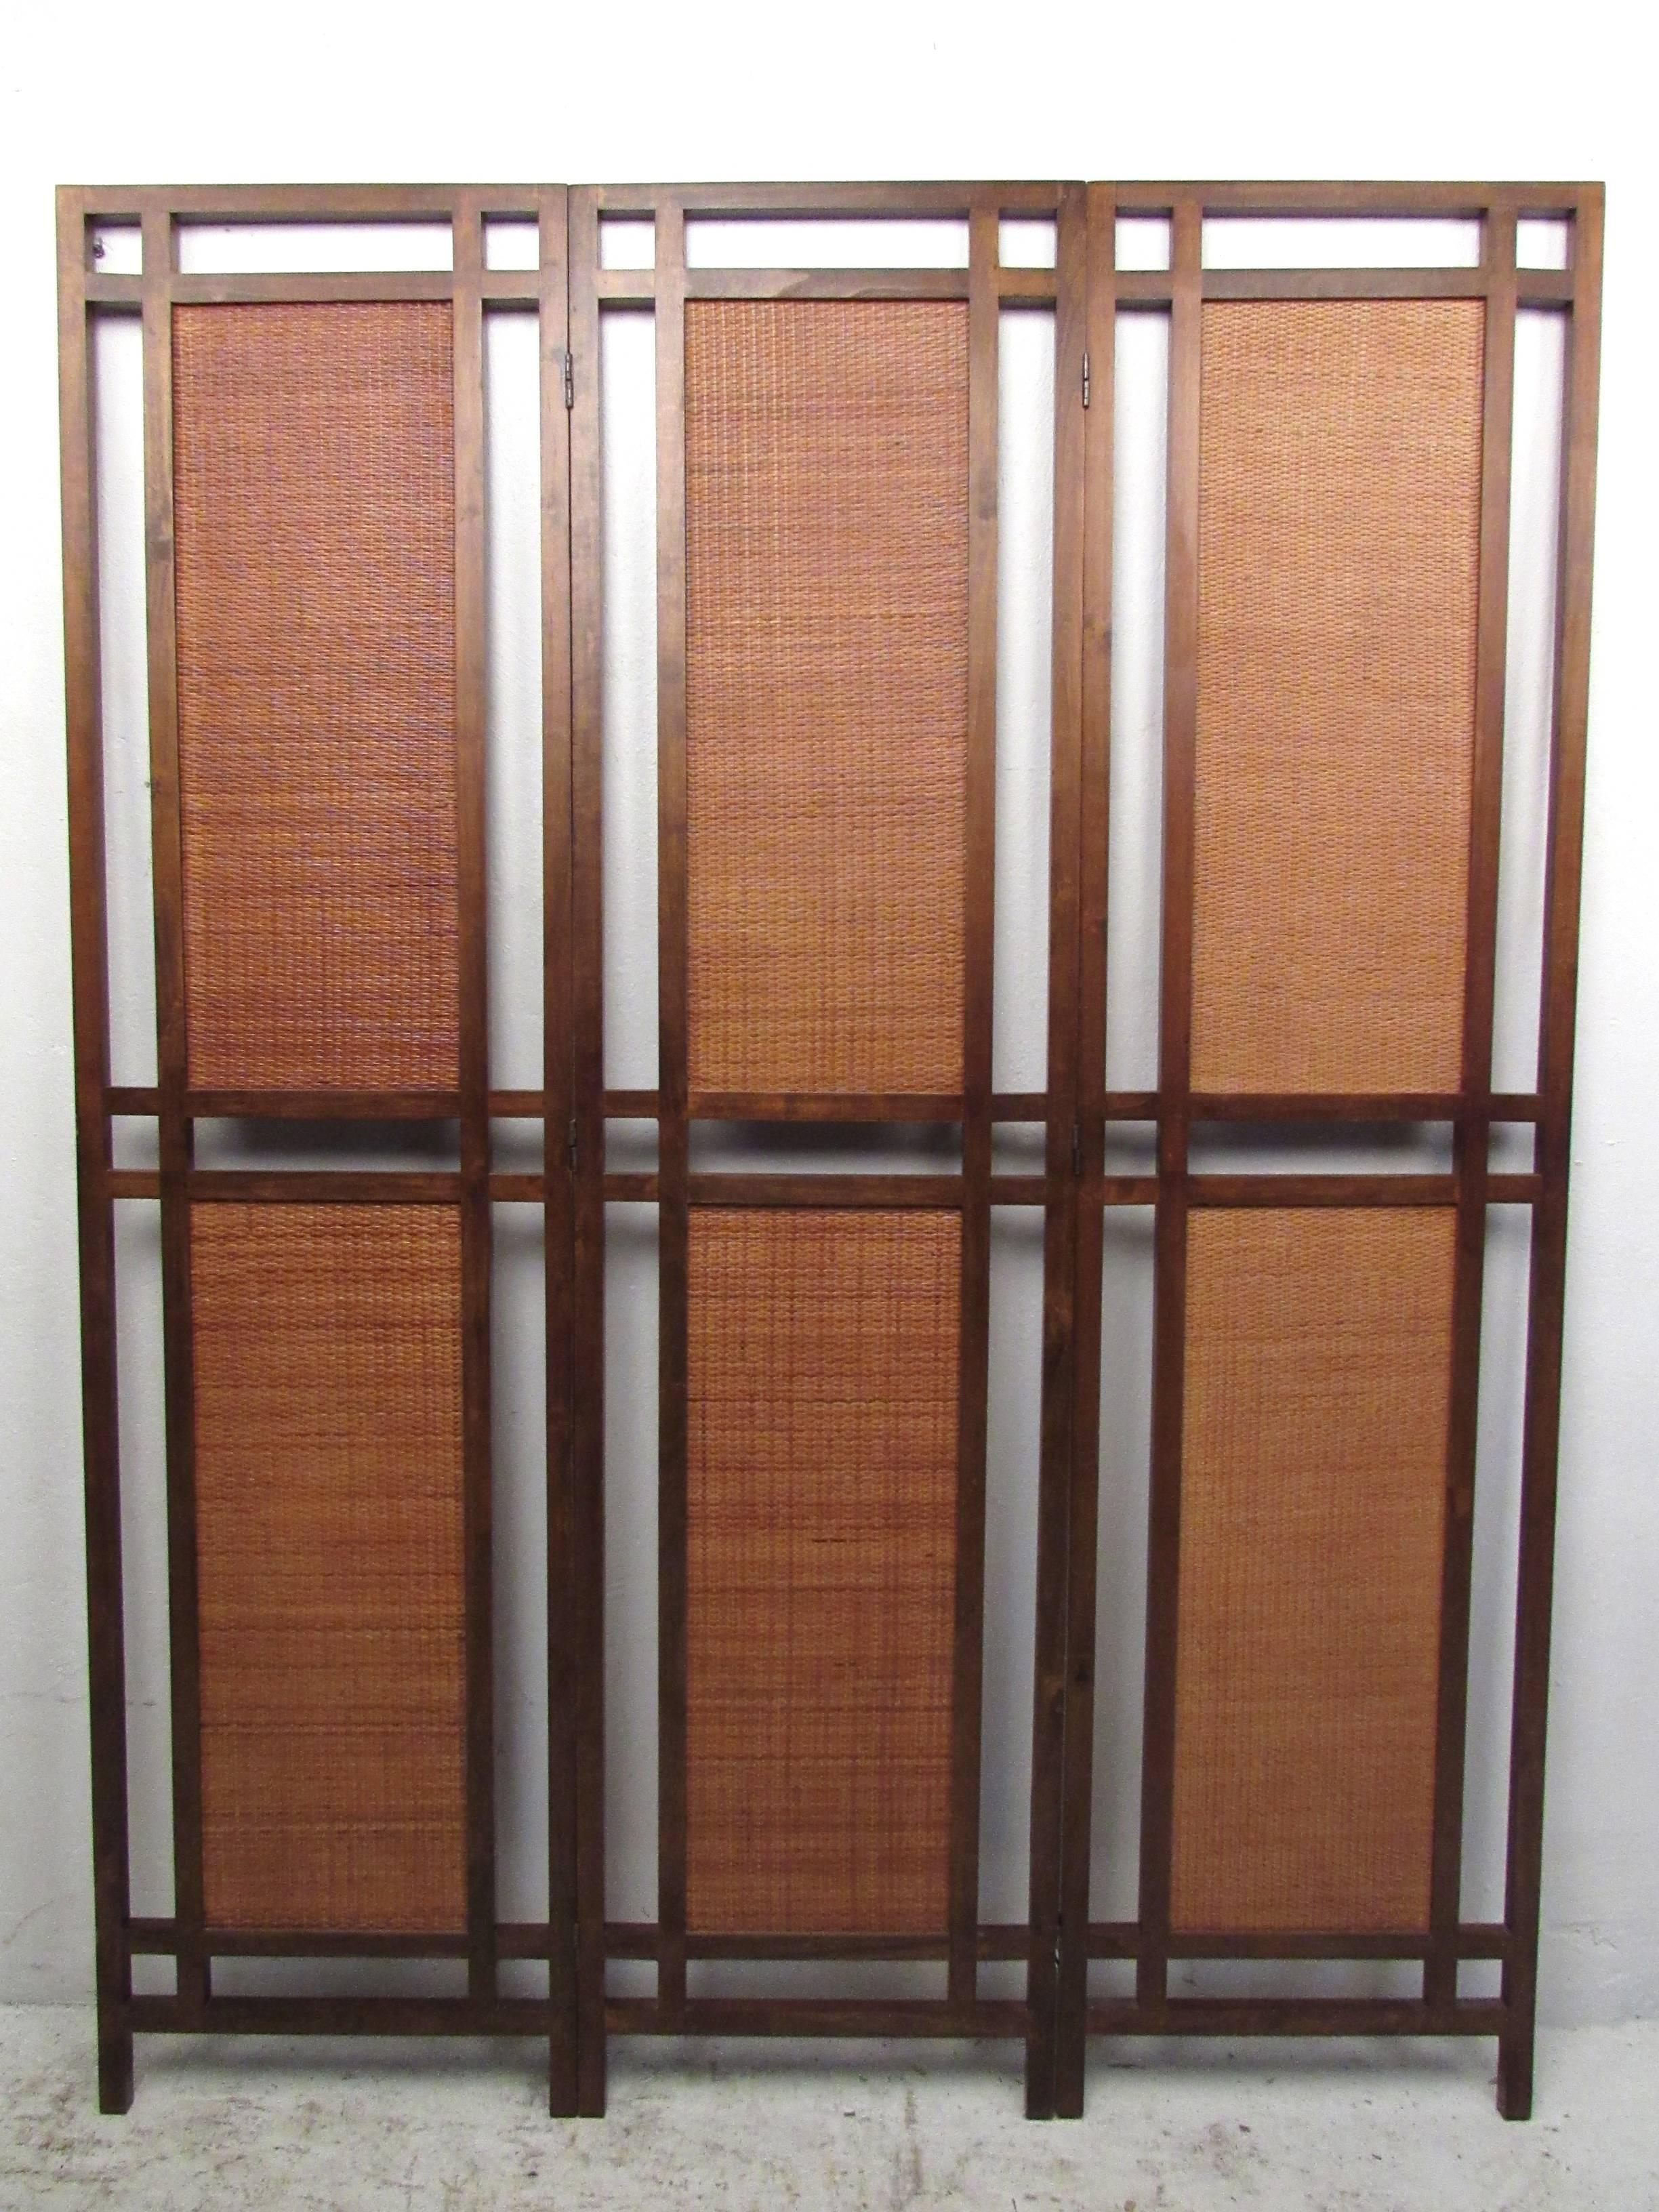 Nicely detailed Mid-Century Modern three-panel screen with rattan panels adds vintage style to home or business. Please confirm item location (NY or NJ). 